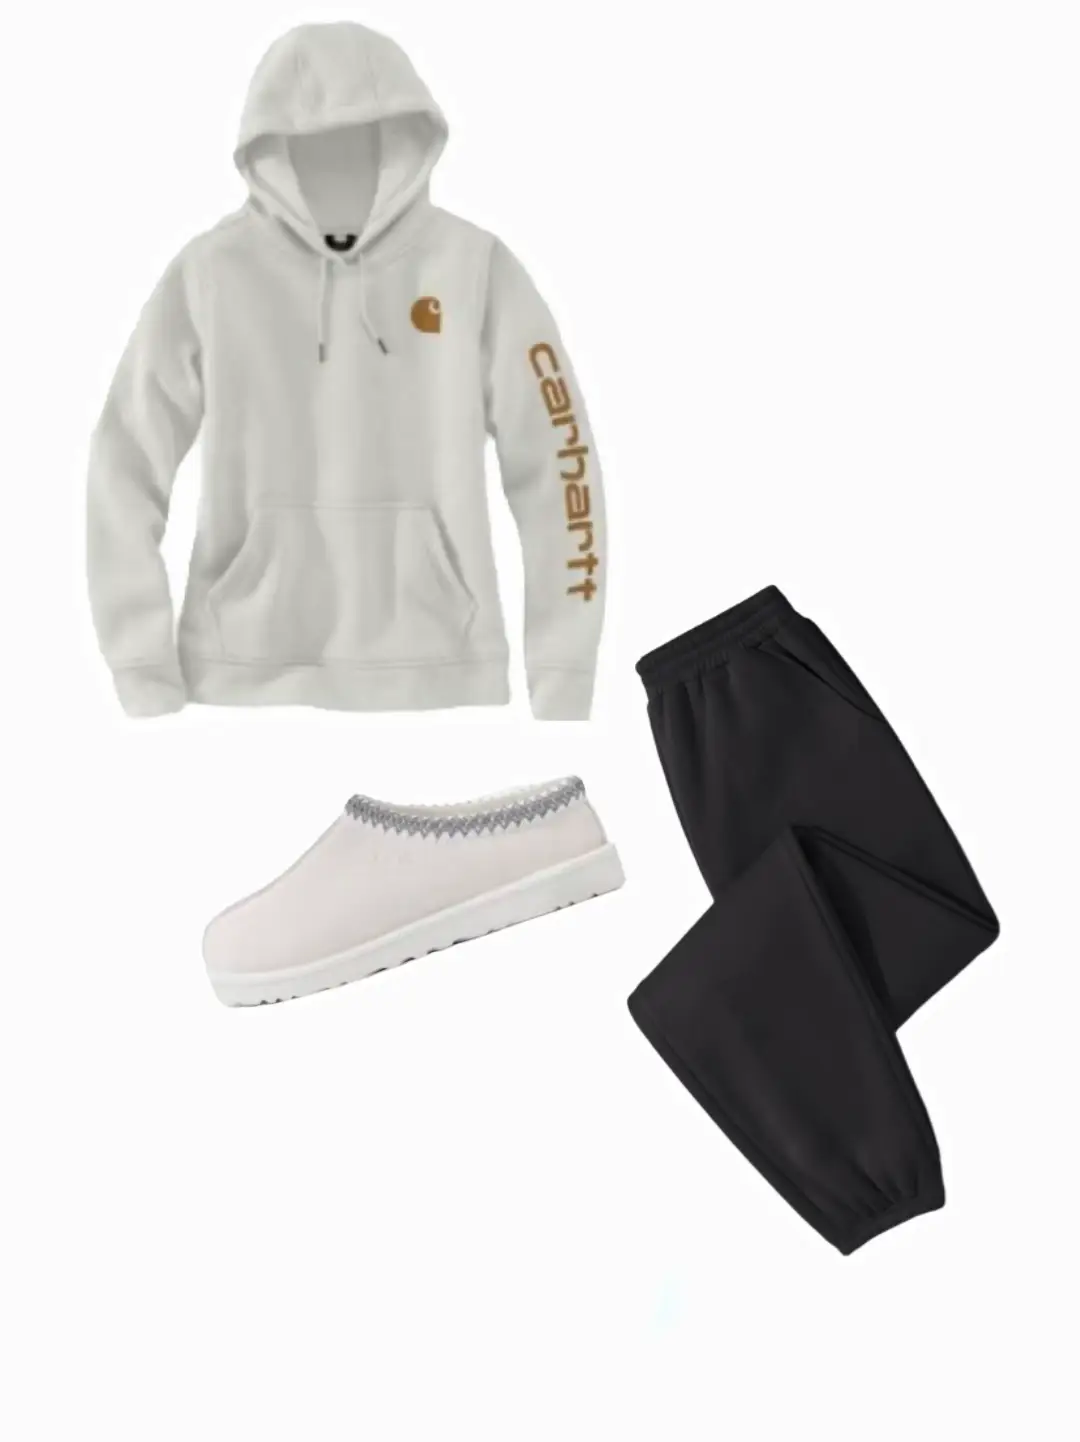 Someone purchased the white girl start up kit crossfit hoodie, yoga pants,  uggs, and starbucks - 9GAG